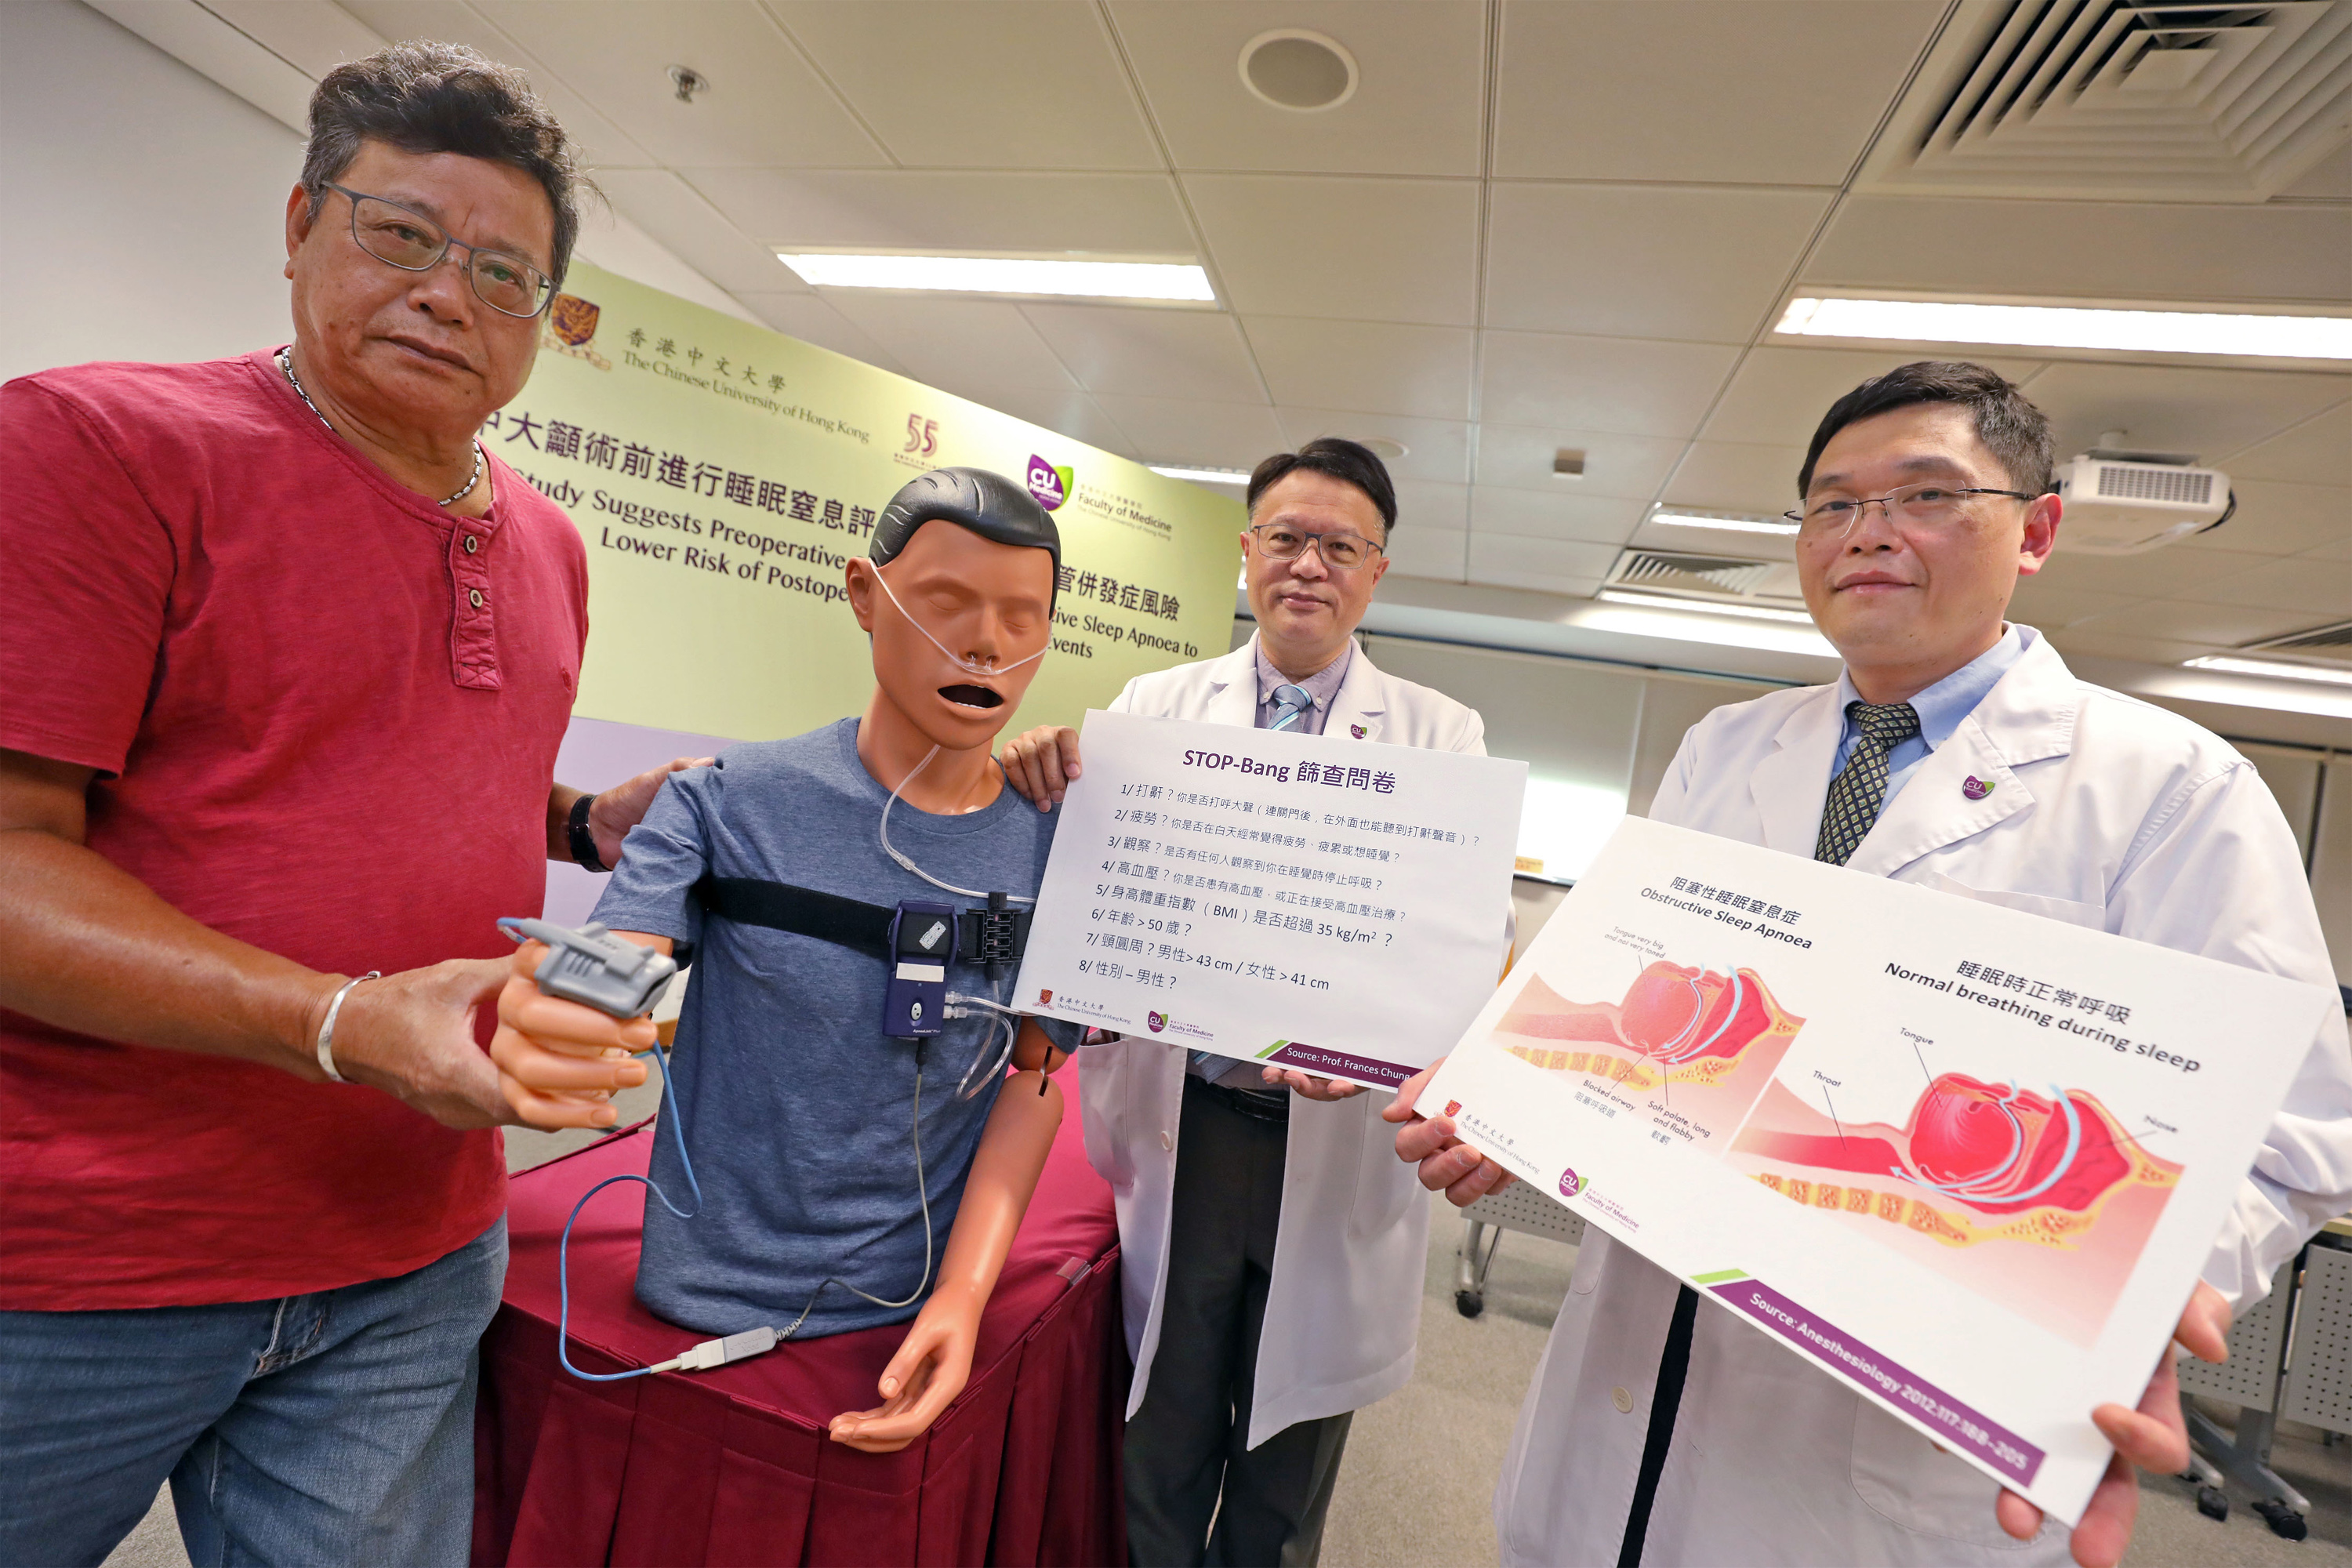 A study conducted by CUHK Faculty of Medicine shows that patients with unrecognised severe OSA have a two-fold increased risk of postoperative cardiovascular complications compared to those without the disorder. Researchers suggest preoperative OSA screening should be considered in clinical practice to lower the risk of postoperative cardiovascular events.